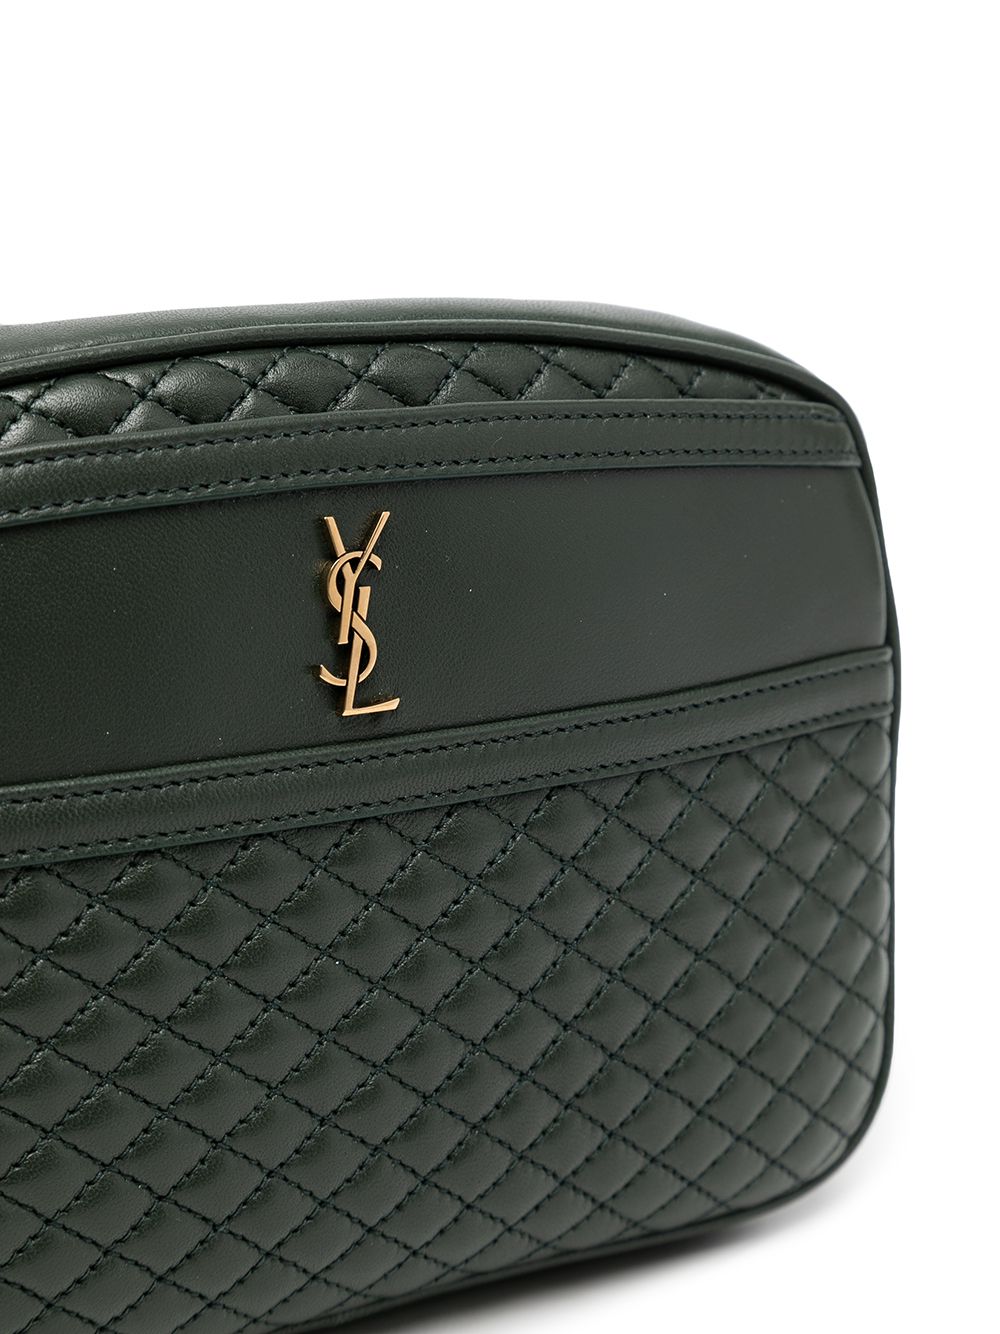 Saint Laurent Victoire Quilted Leather Camera Bag